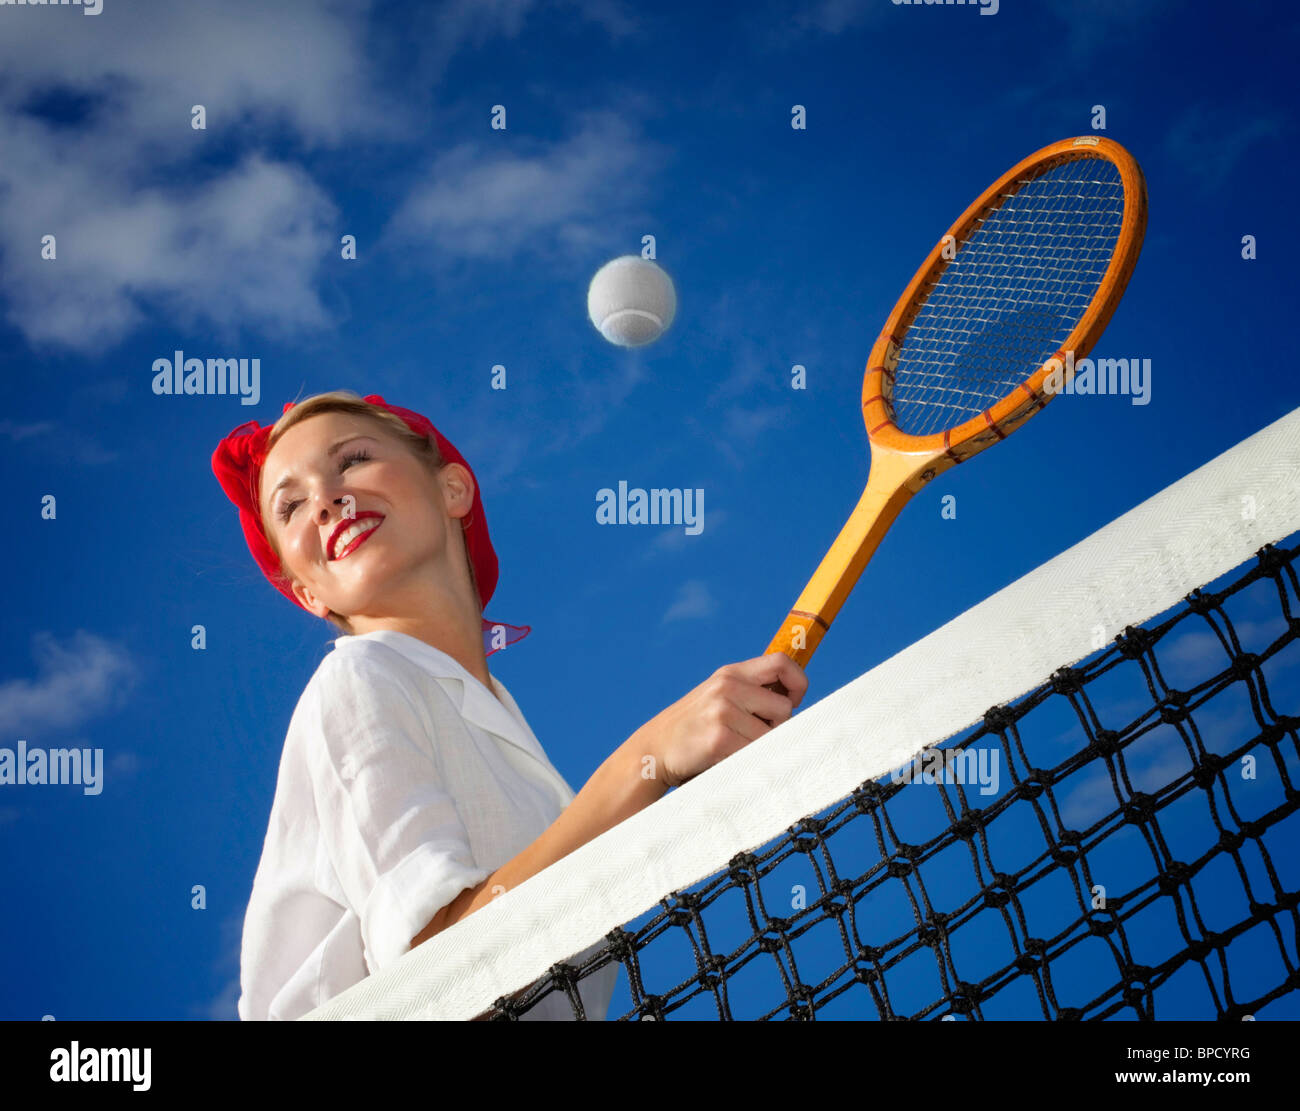 Low angle view of young woman playing tennis Stock Photo